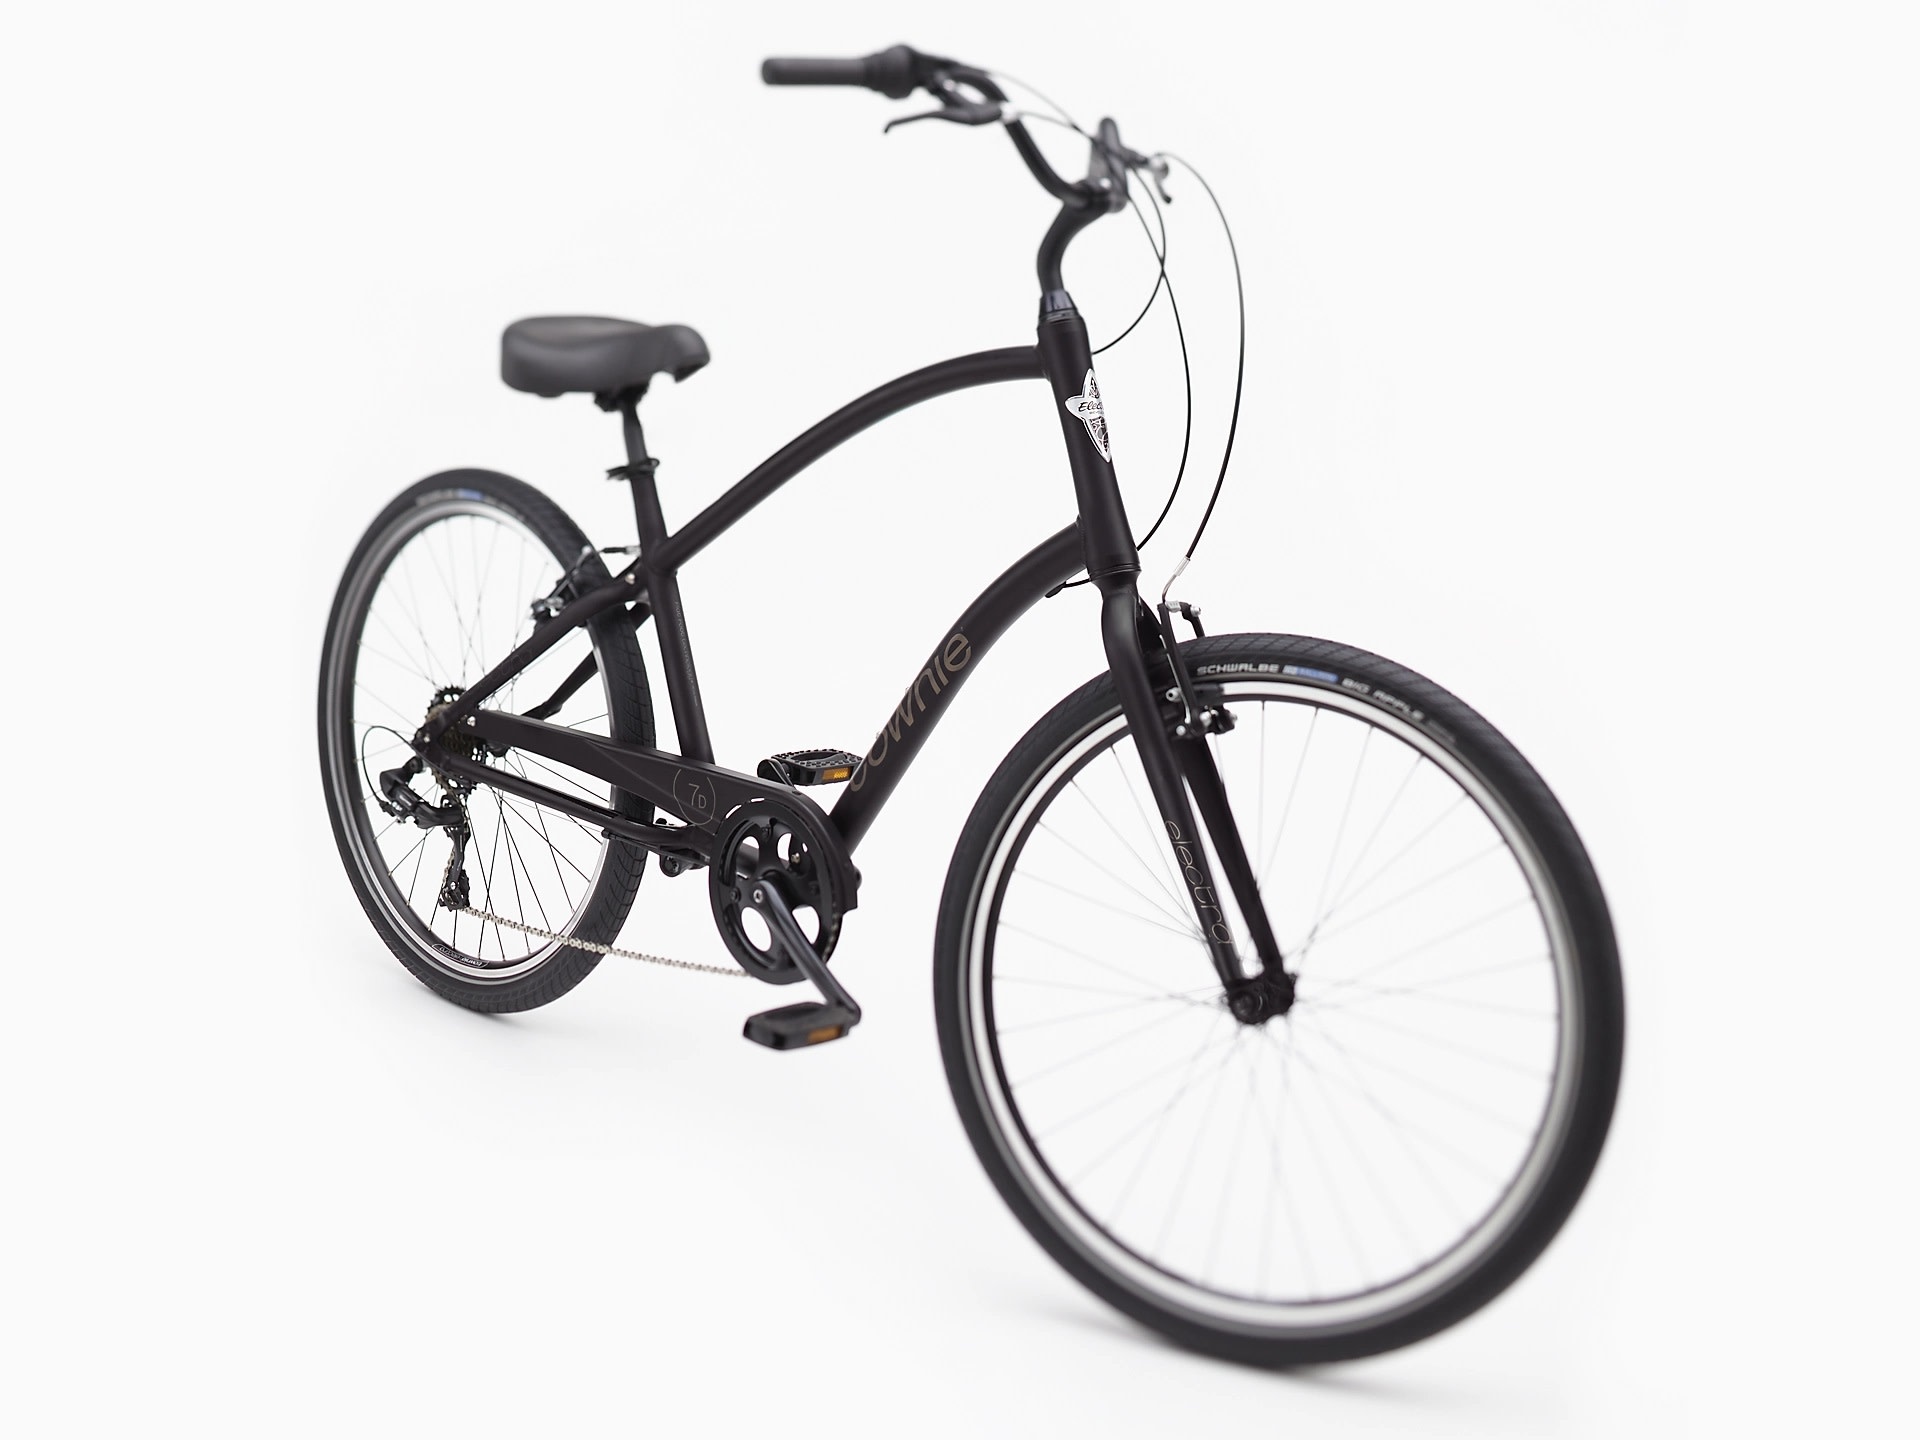 Electra Electra Townie 7D Step-Over